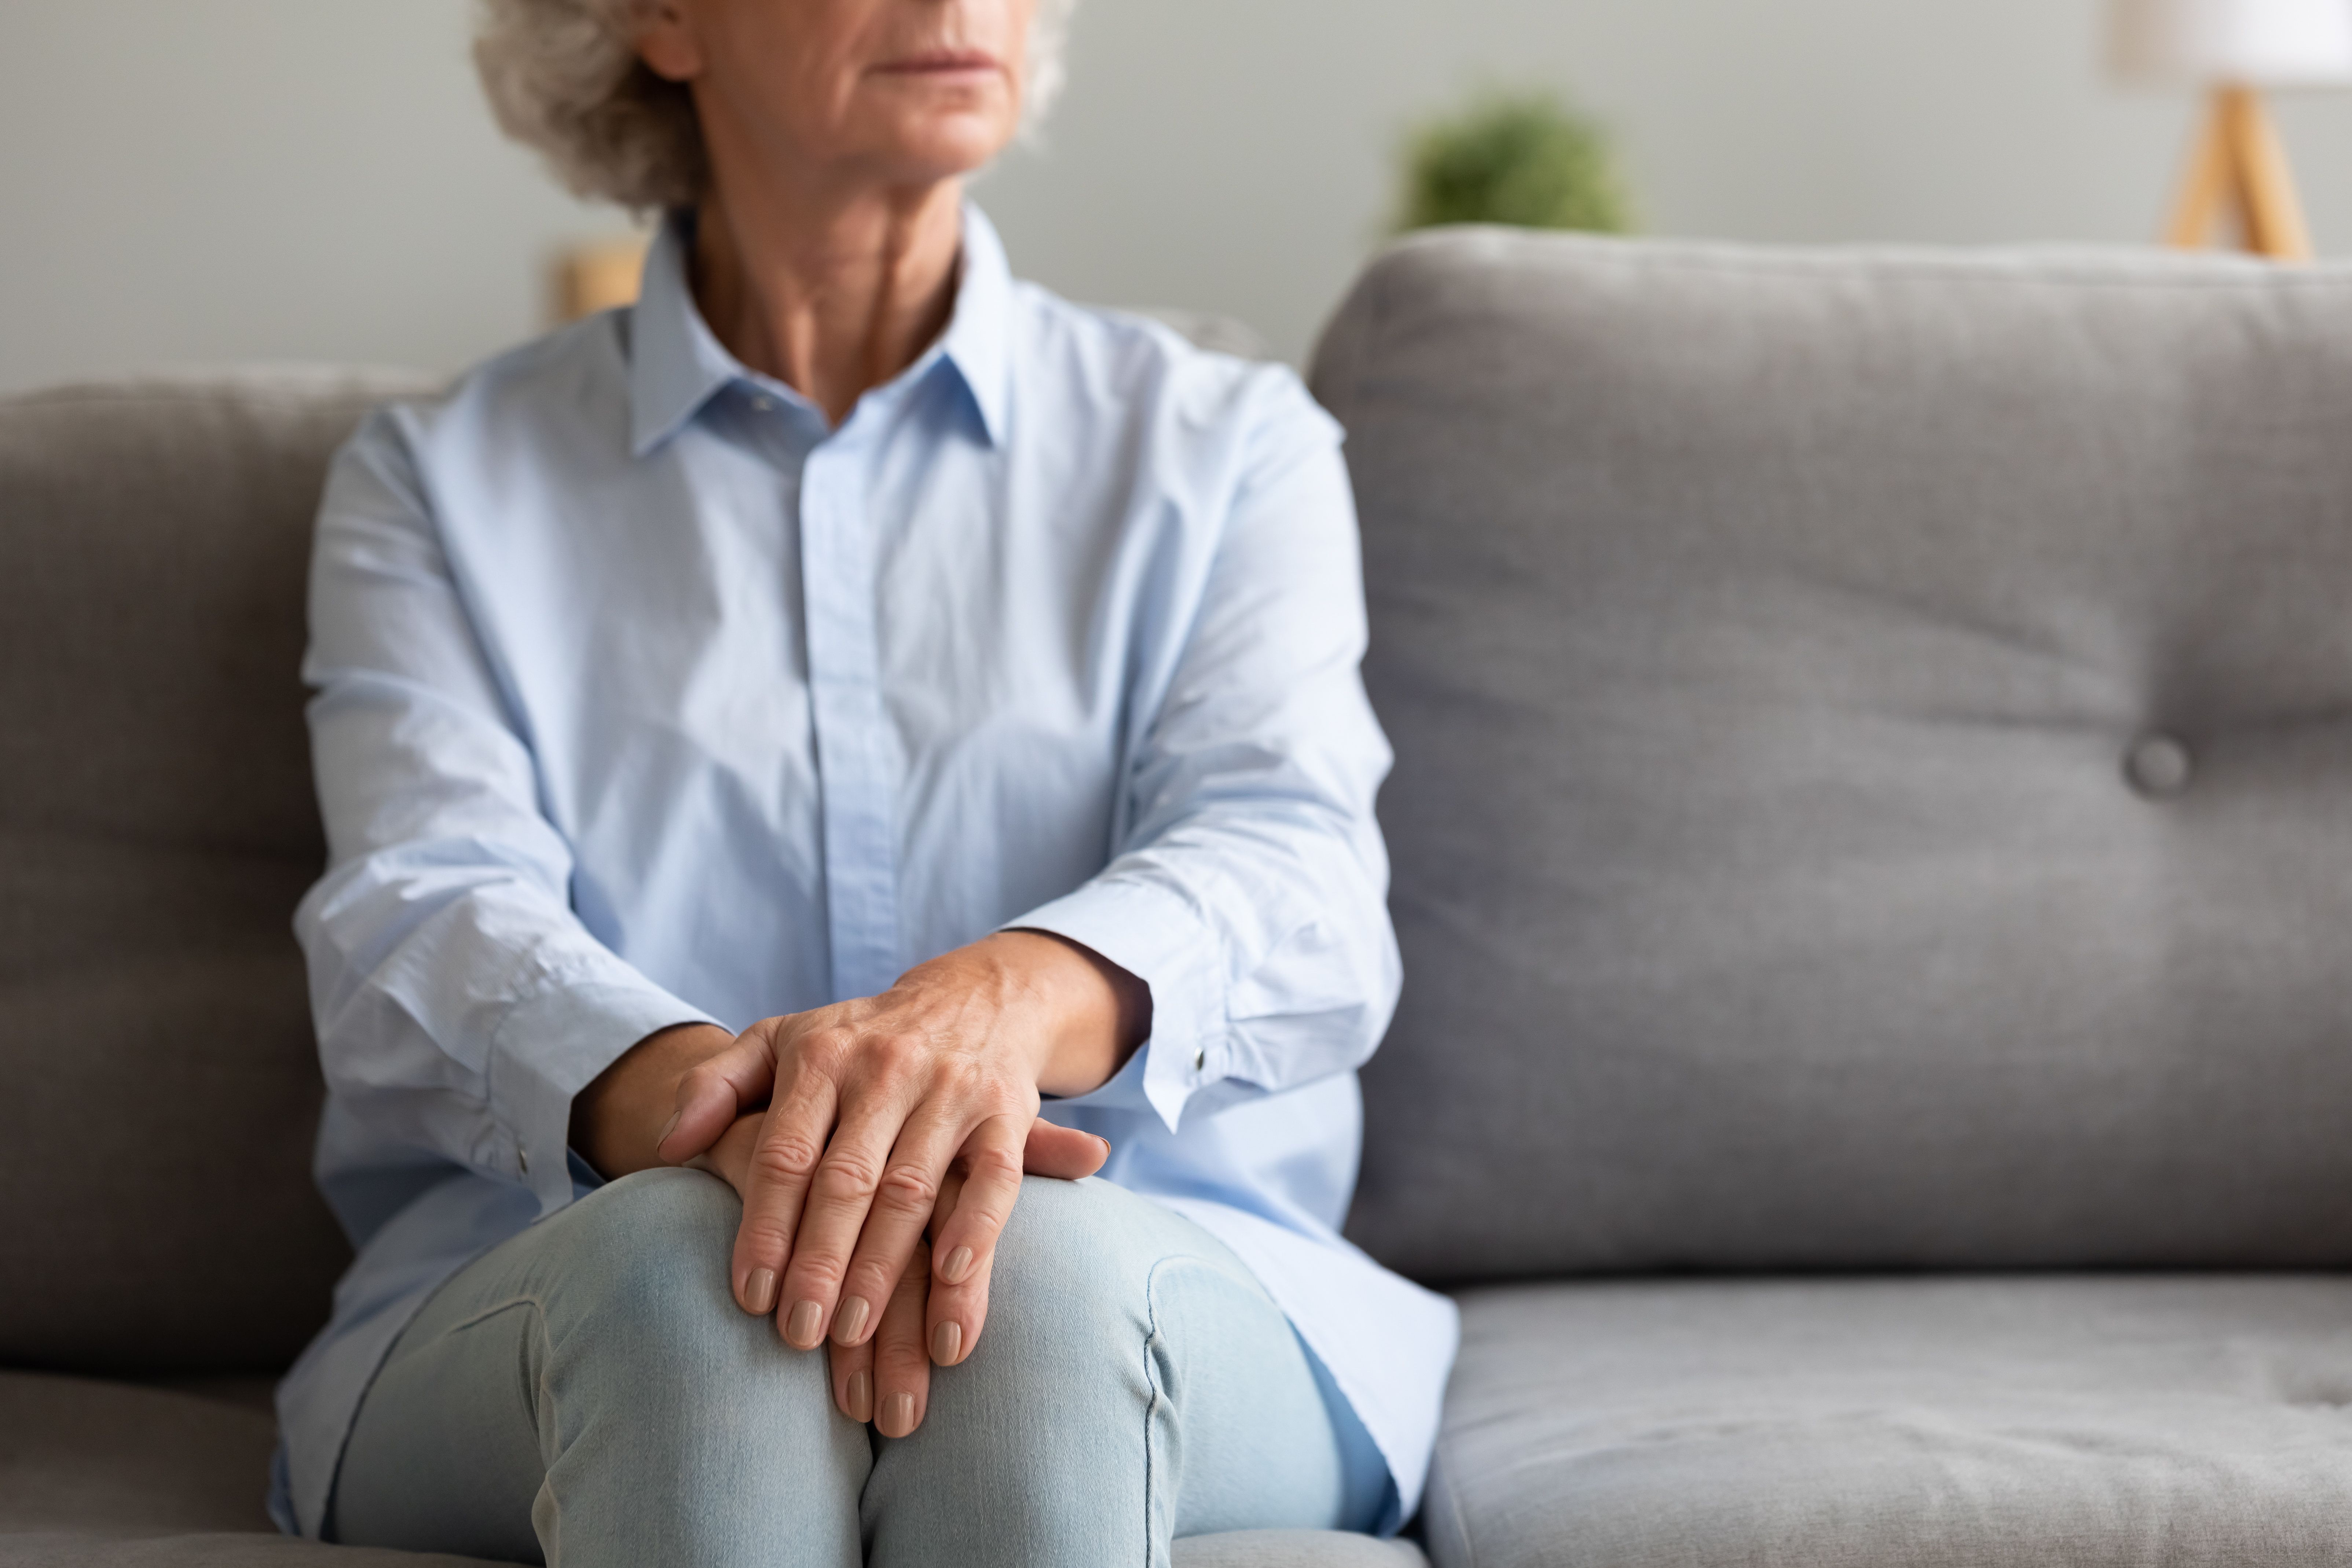 Loneliness Associated With Increased Risk of Type 2 Diabetes 